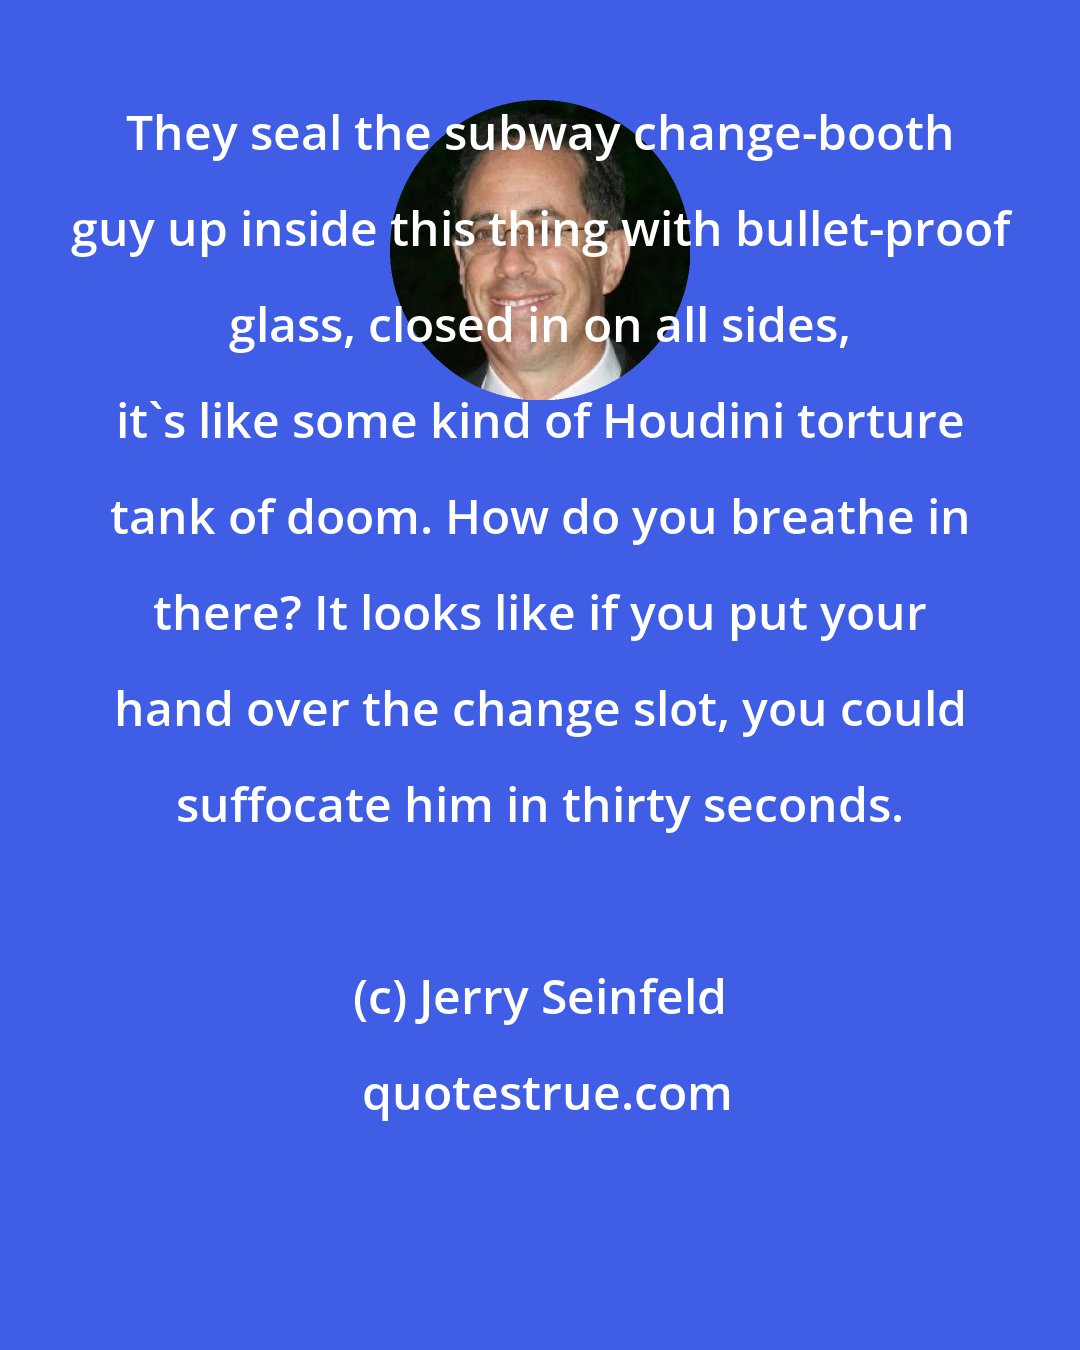 Jerry Seinfeld: They seal the subway change-booth guy up inside this thing with bullet-proof glass, closed in on all sides, it's like some kind of Houdini torture tank of doom. How do you breathe in there? It looks like if you put your hand over the change slot, you could suffocate him in thirty seconds.